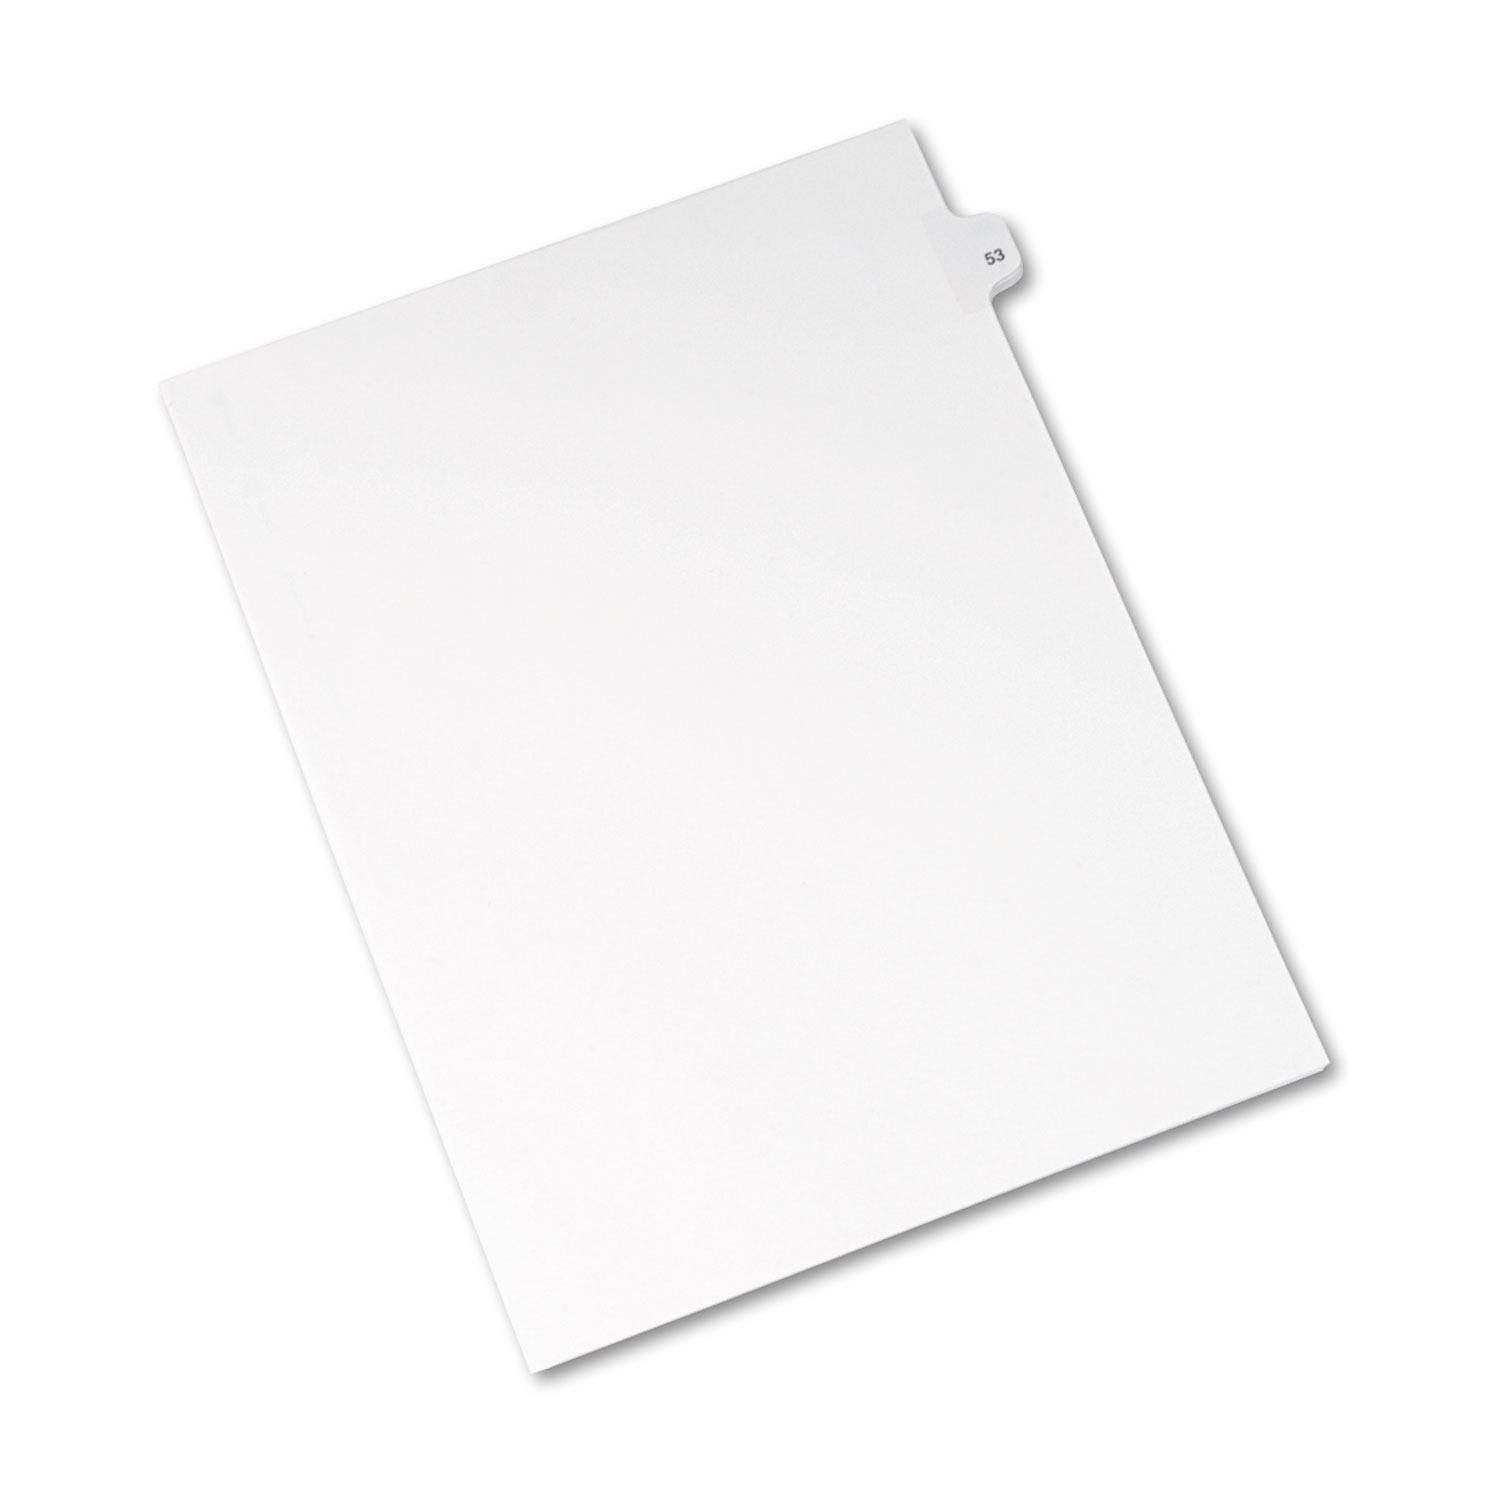 Avery-Style Legal Exhibit Side Tab Divider, Title: 53, Letter, White, 25/Pack